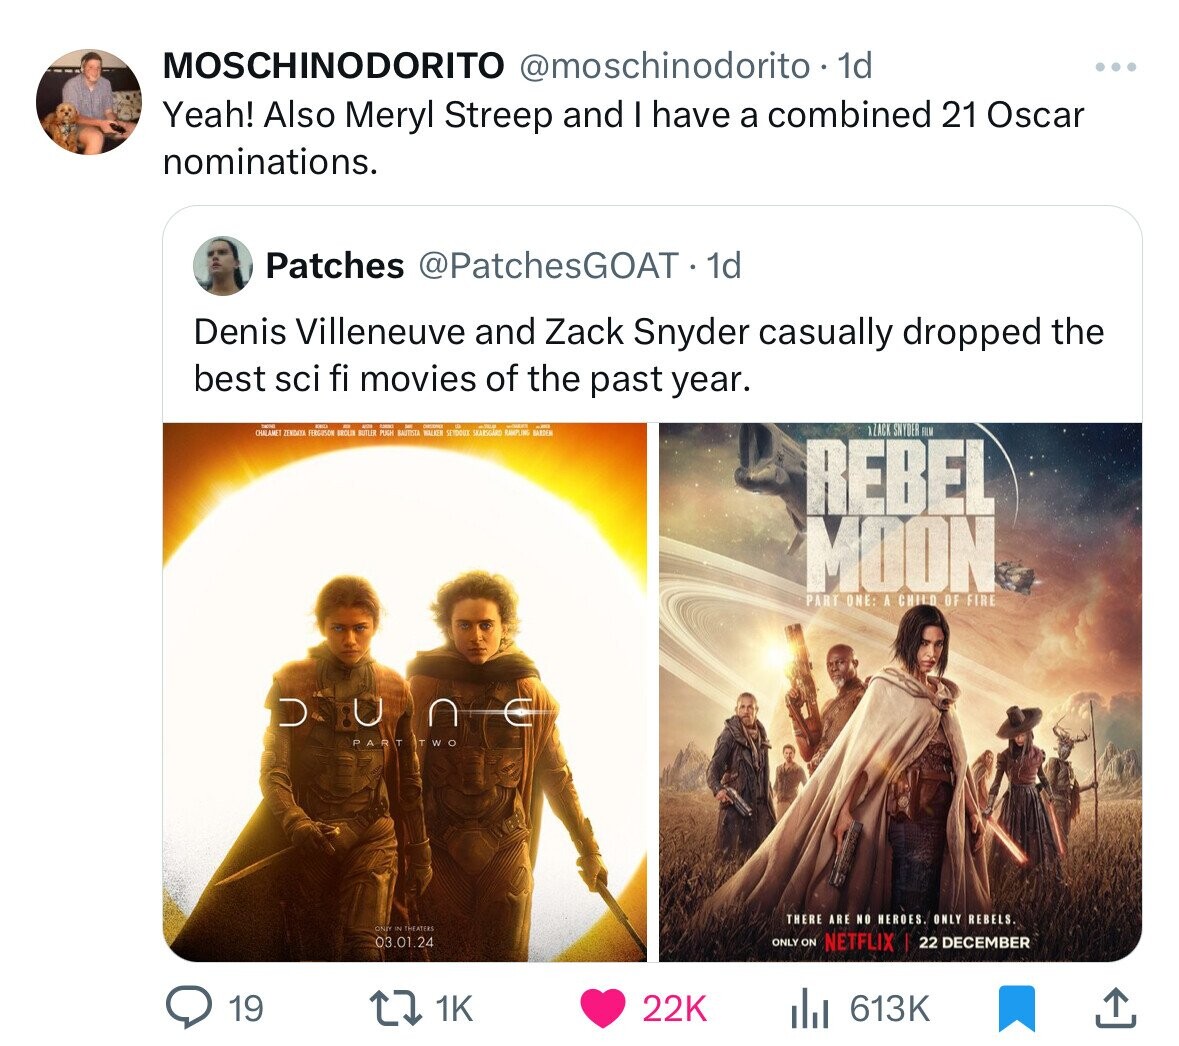 poster - Moschinodorito 1d Yeah! Also Meryl Streep and I have a combined 21 Oscar nominations. Patches 1d . Denis Villeneuve and Zack Snyder casually dropped the best sci fi movies of the past year. Chalamet Zendaya Ferguson Brolin Butler Pugh Bautista Wa